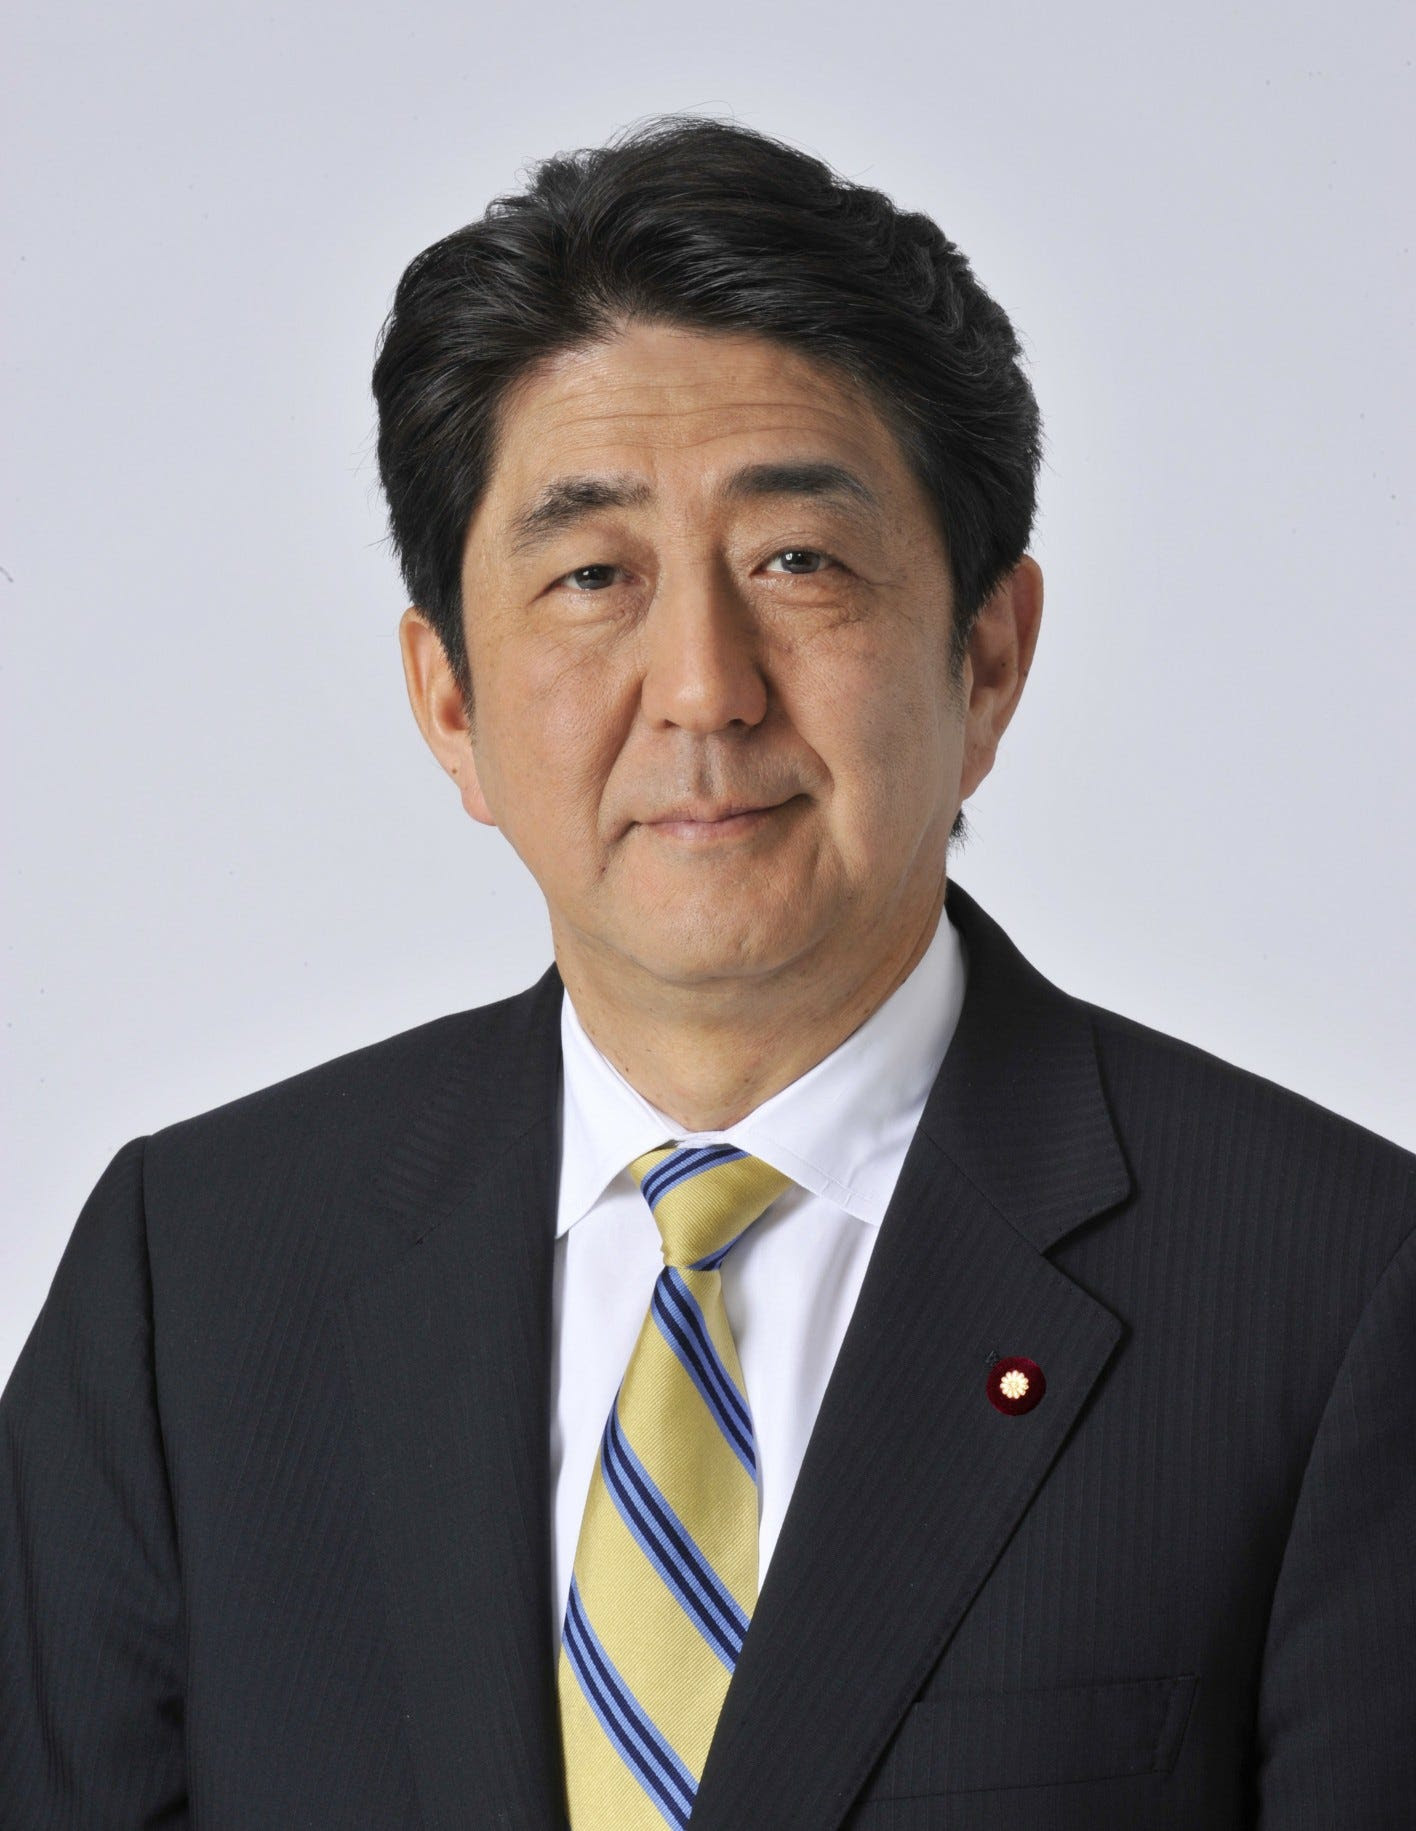 By Prime Minister of Japan Official - https://www.kantei.go.jp/jp/content/20150101souri_2.jpg, CC BY 4.0, https://commons.wikimedia.org/w/index.php?curid=64095558